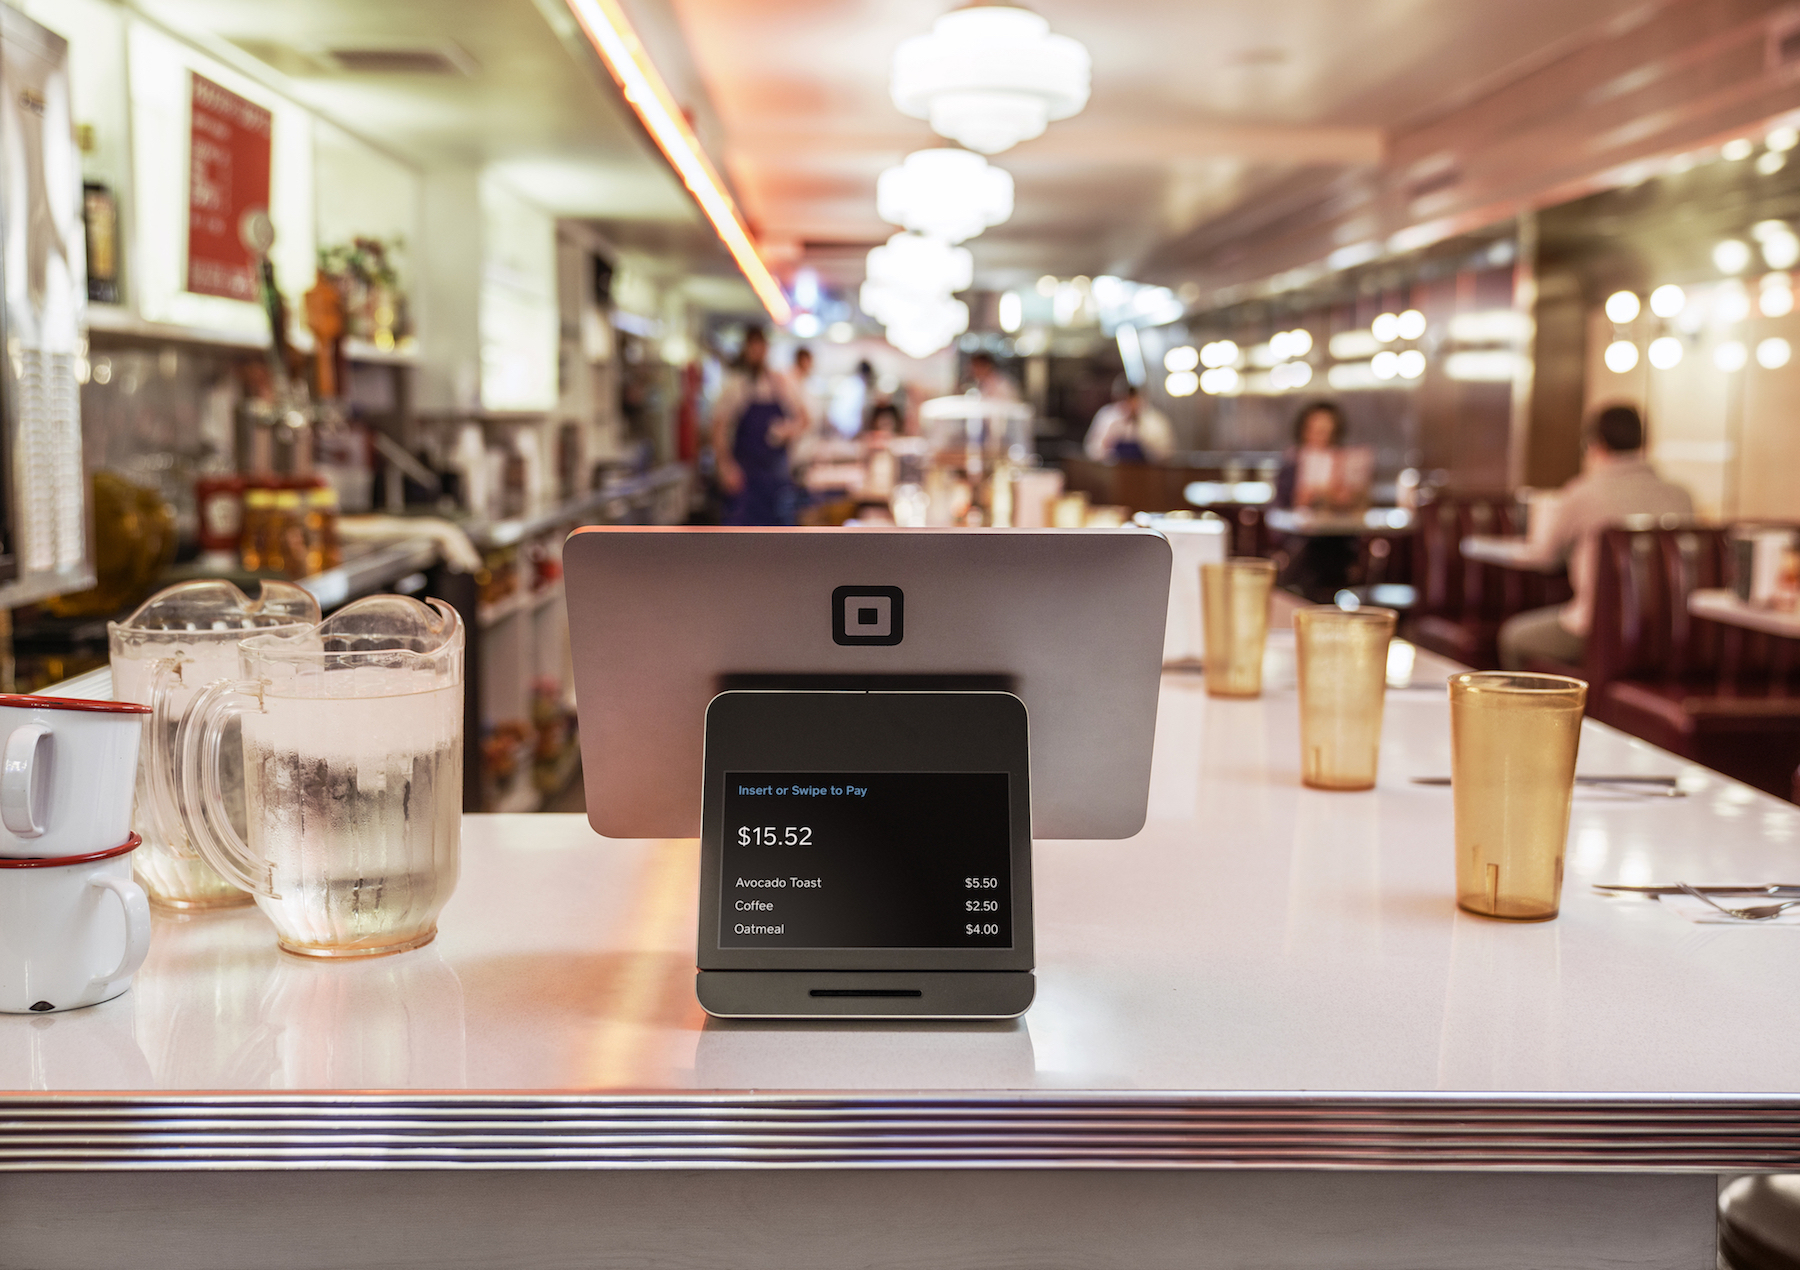 Square Point-of-Sale